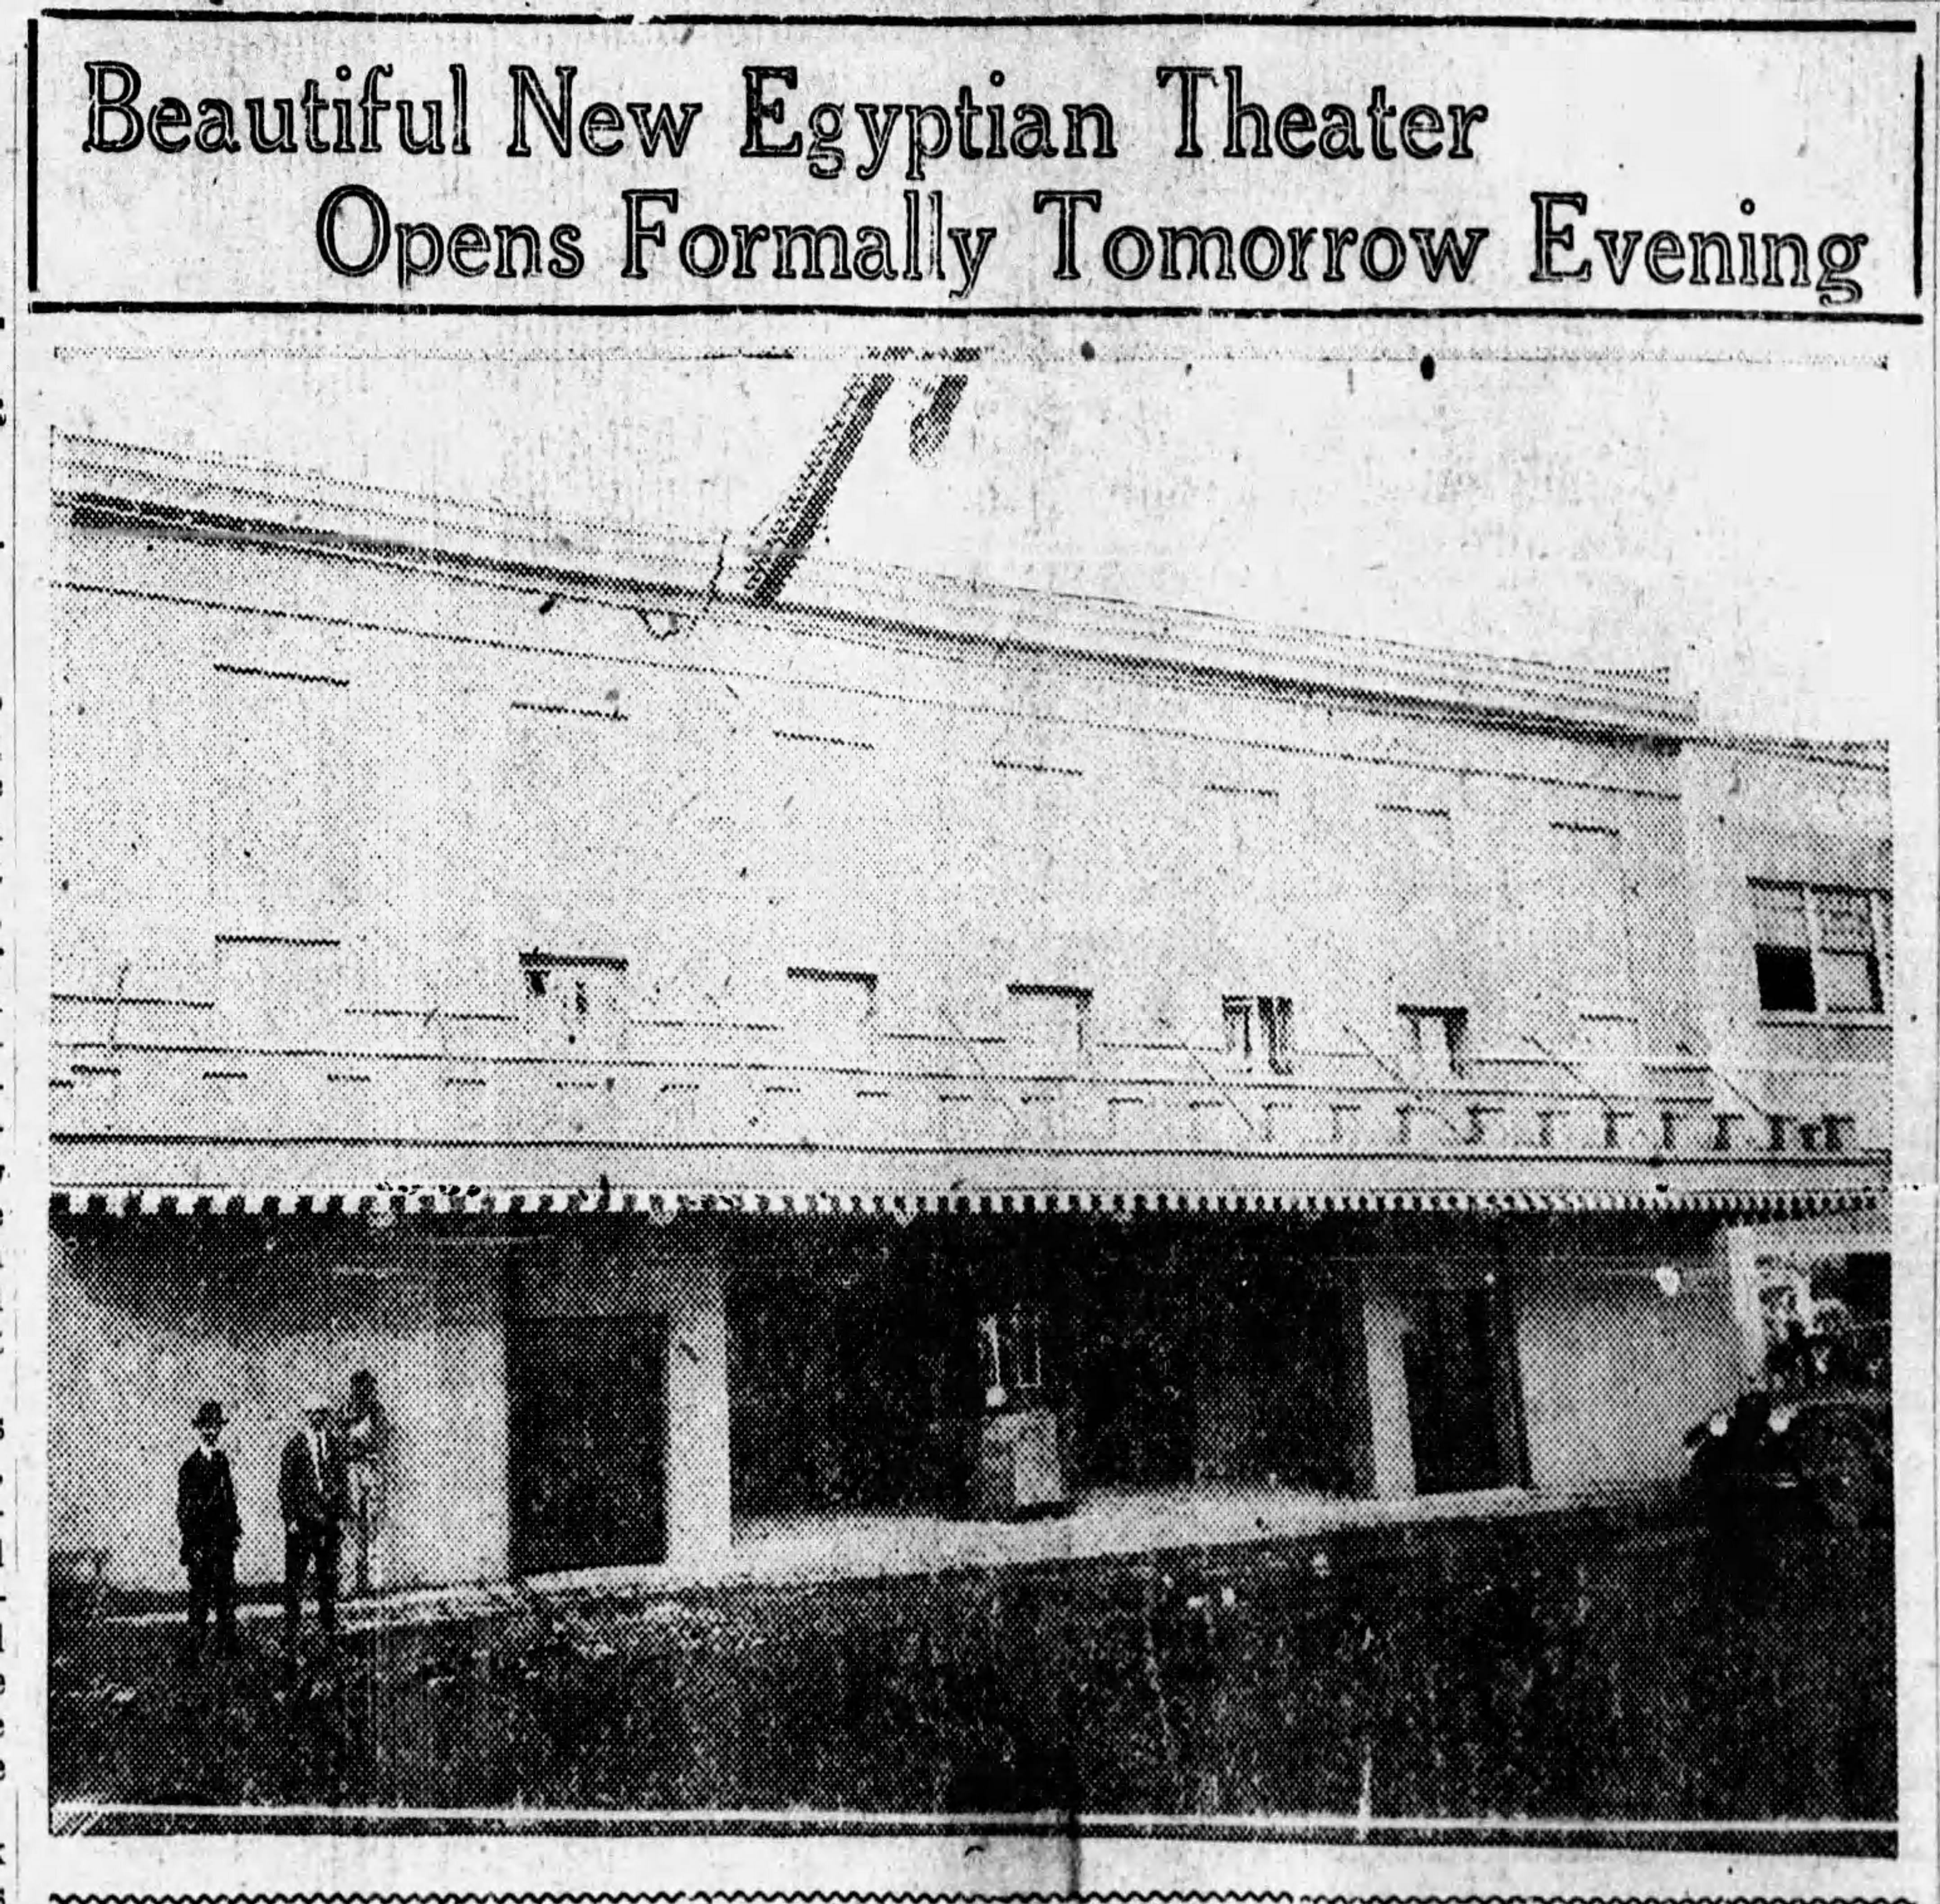 Newspaper clipping with image of the front of the theater